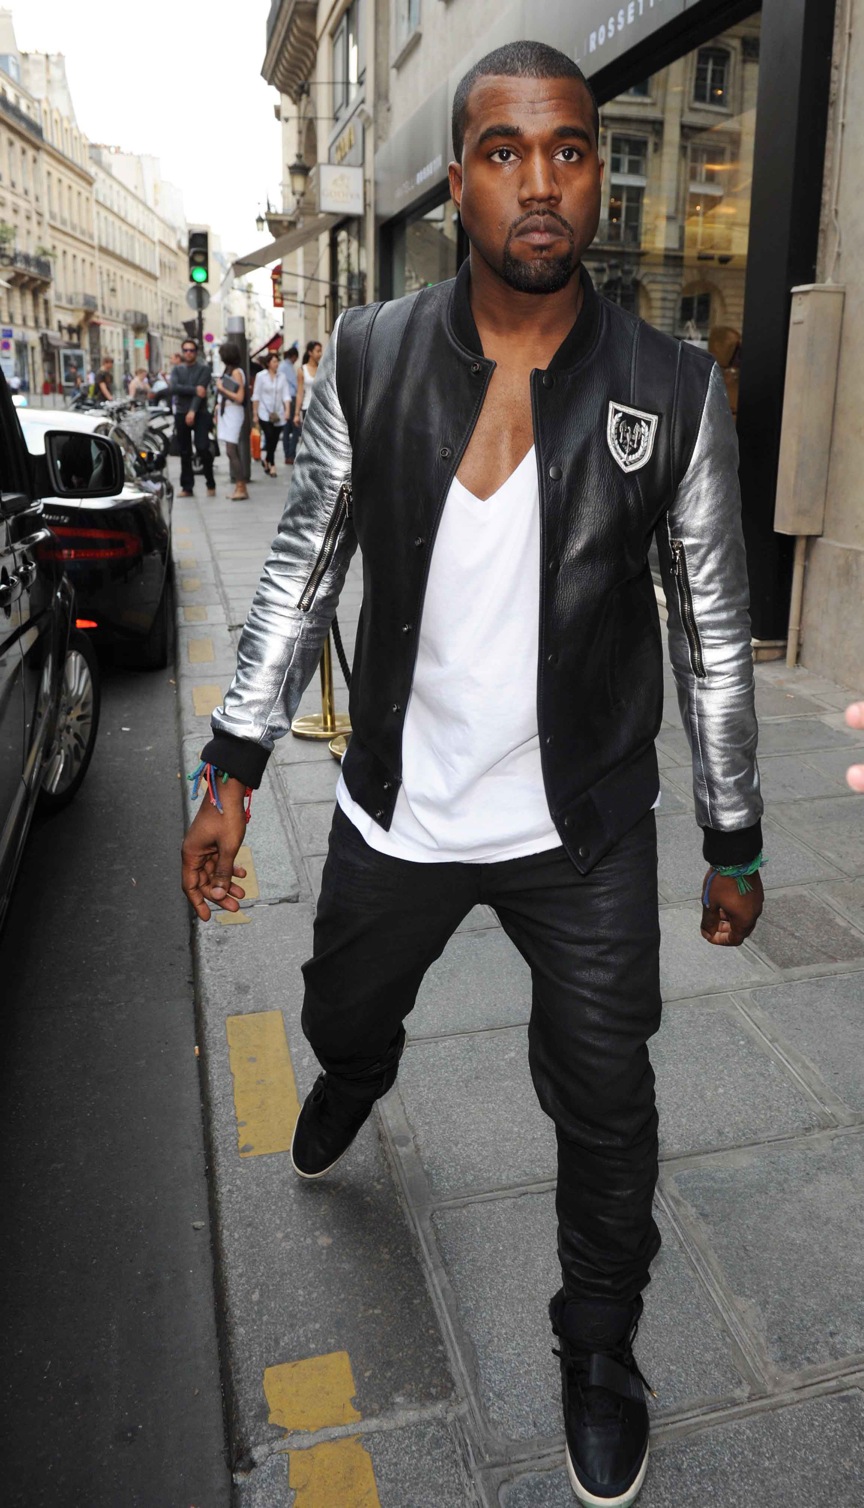 Kanye West photo 140 of 322 pics, wallpaper - photo #403080 - ThePlace2